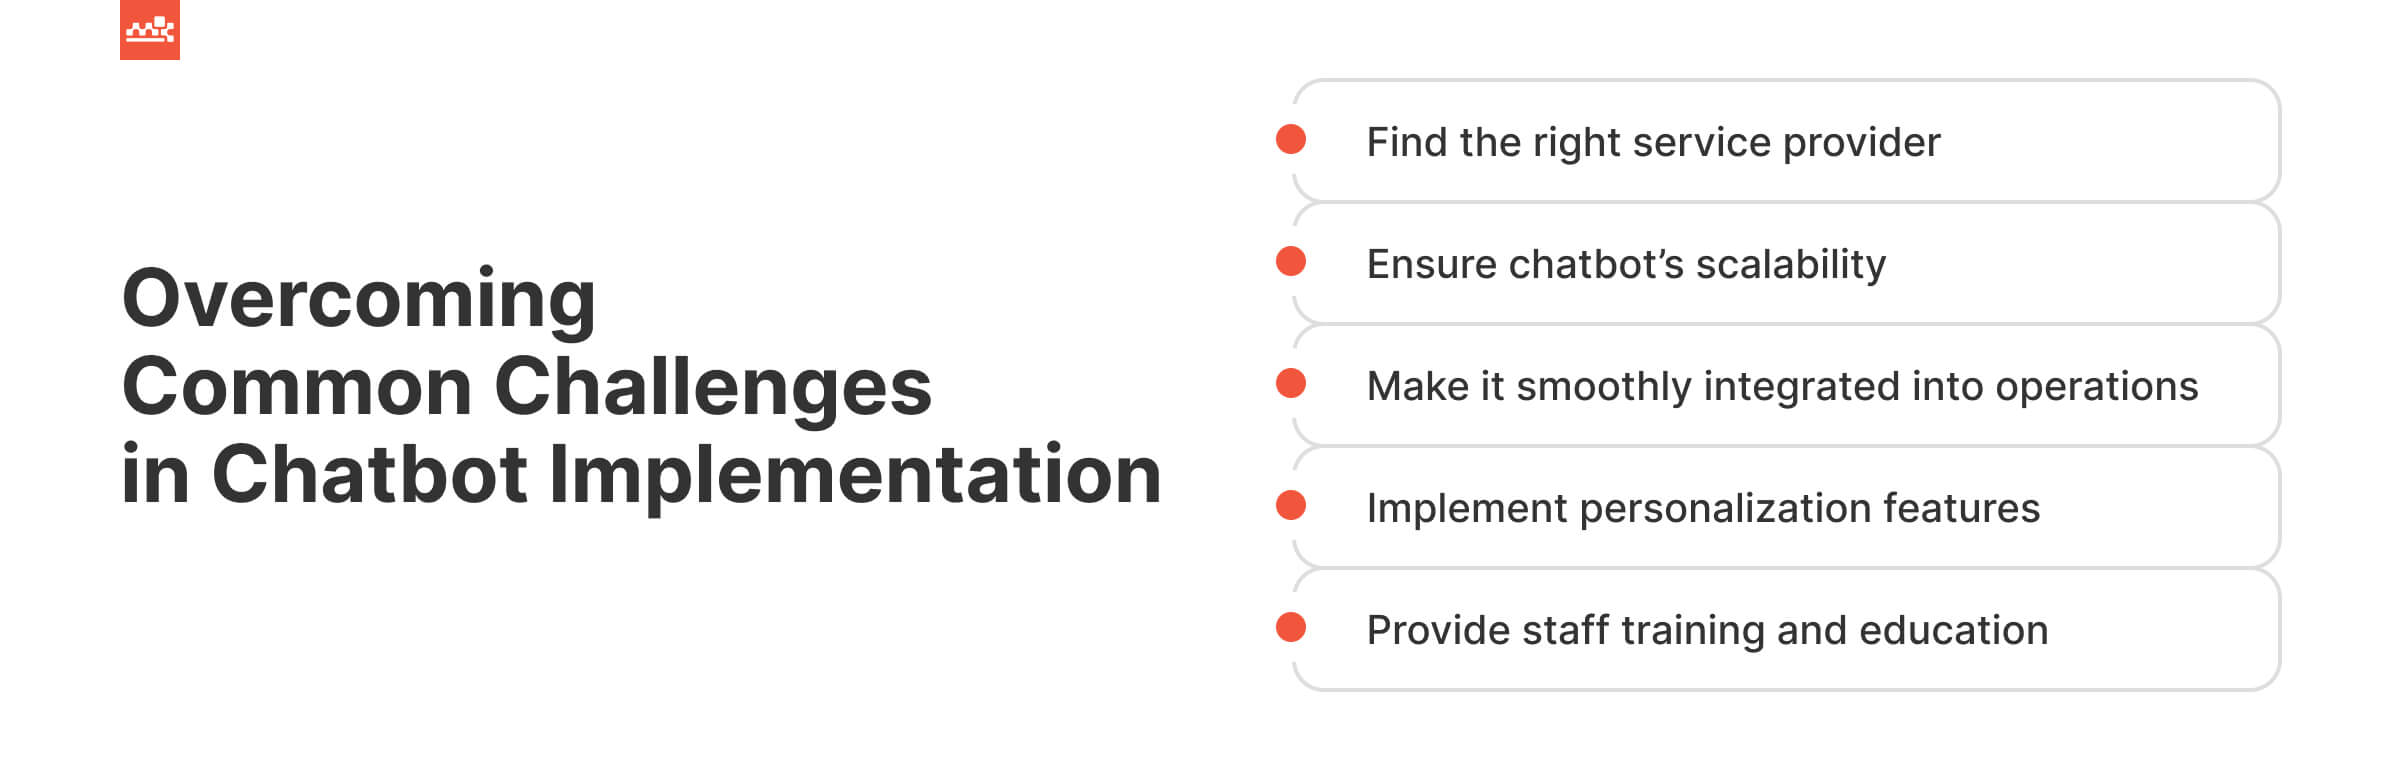 Overcoming Chatbot Implementation Challenges